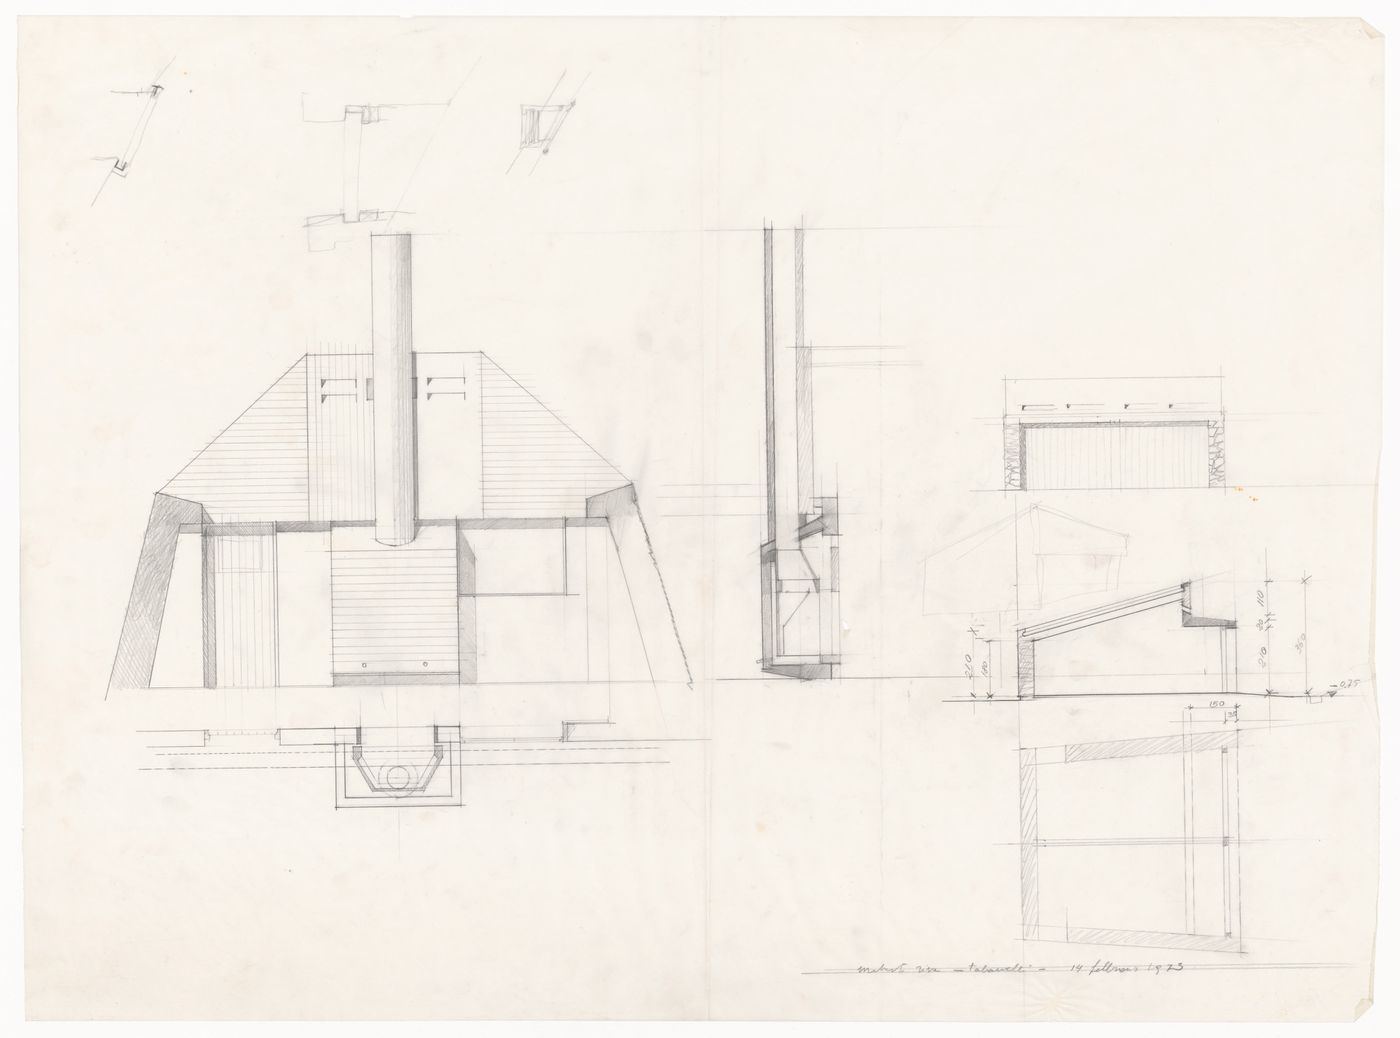 Sections and elevations for Casa Tabanelli, Stintino, Italy